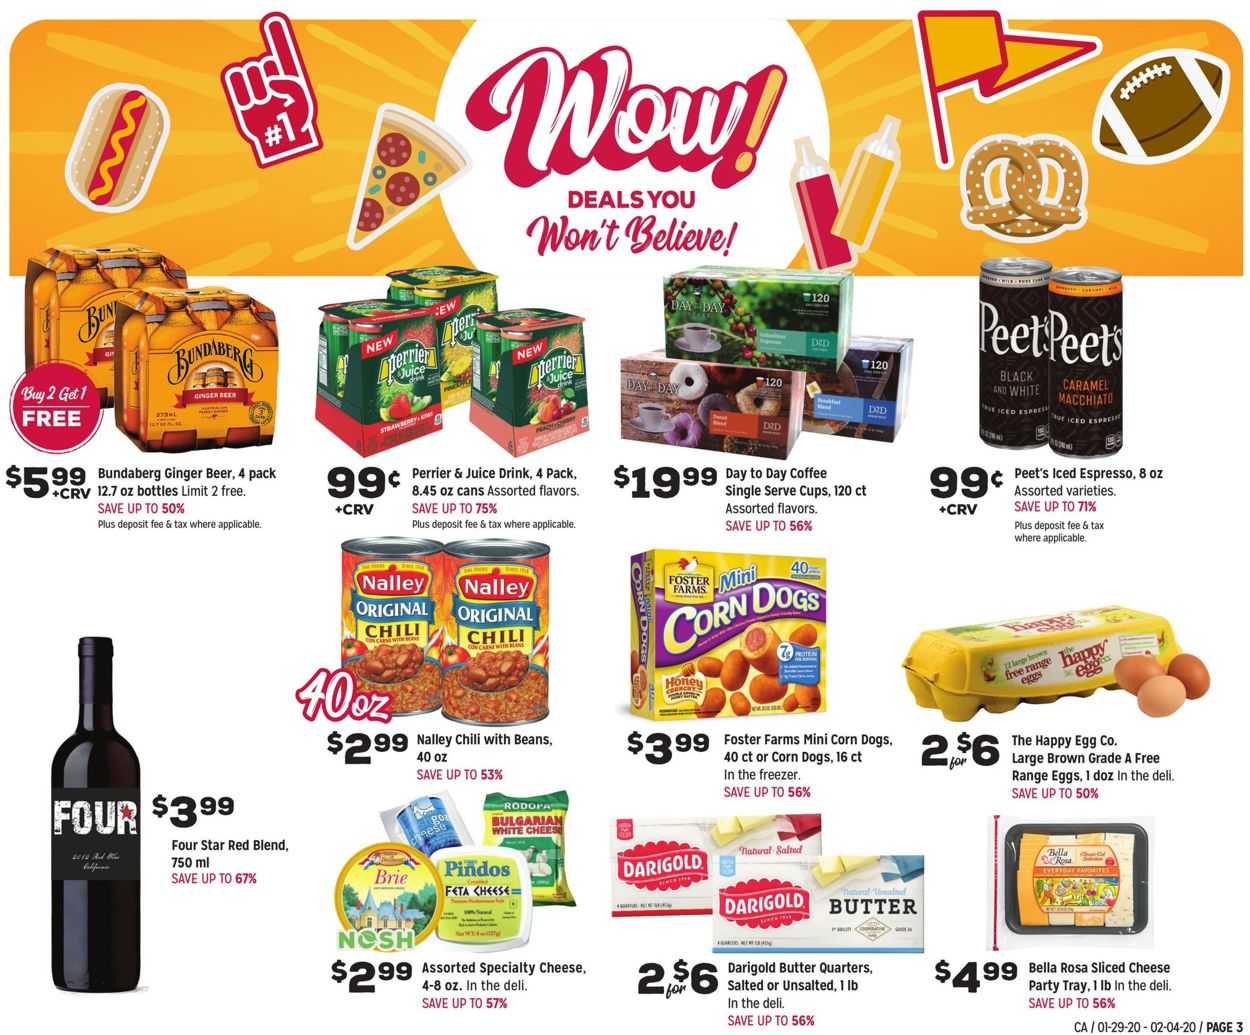 Grocery Outlet Weekly Ad Circular - valid 01/29-02/04/2020 (Page 3)